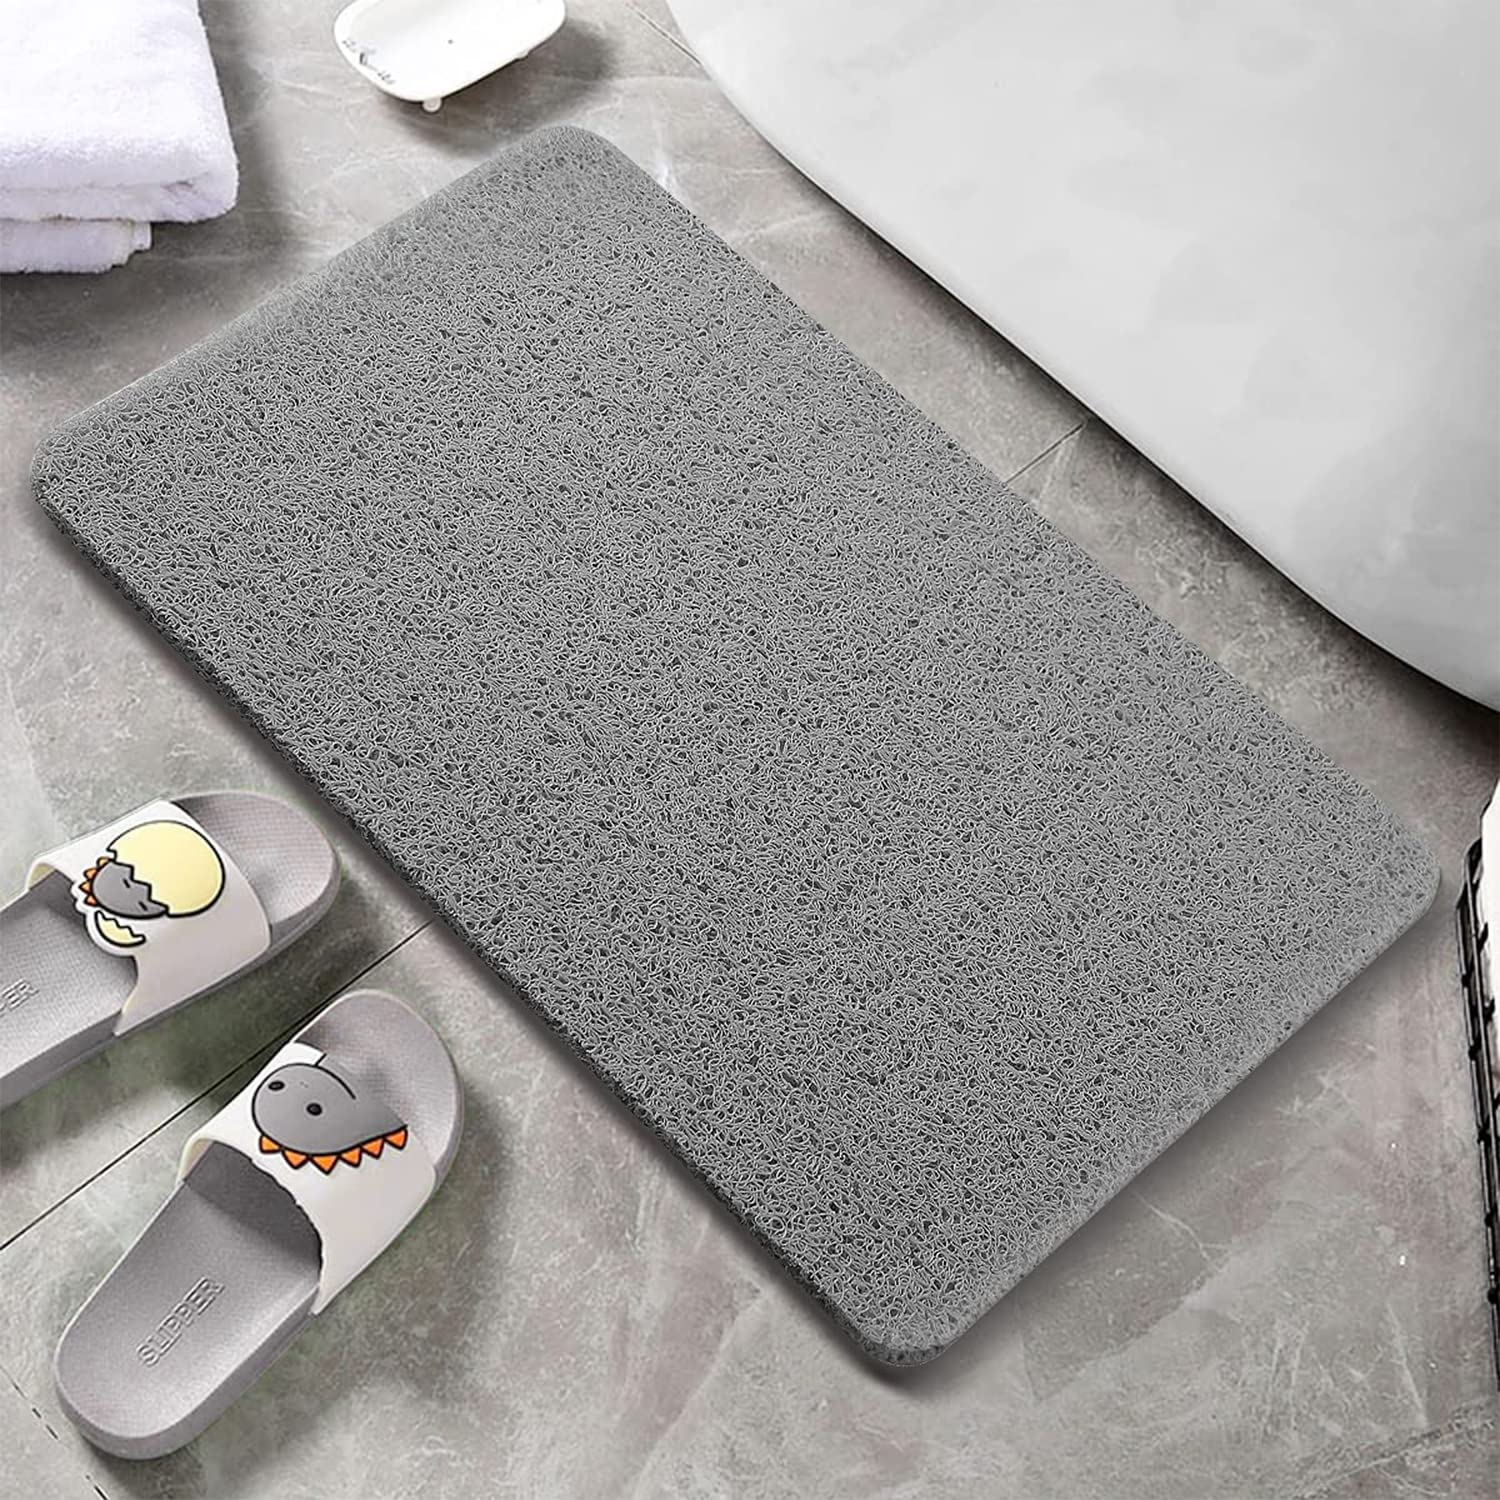 Shower Mats Non Slip Without Suction Cups, 15.7× 36 Inch, PVC Loofah  Bathroom Mats, Loofah Mats for Shower and Bathroom, Quick Drying, Grey